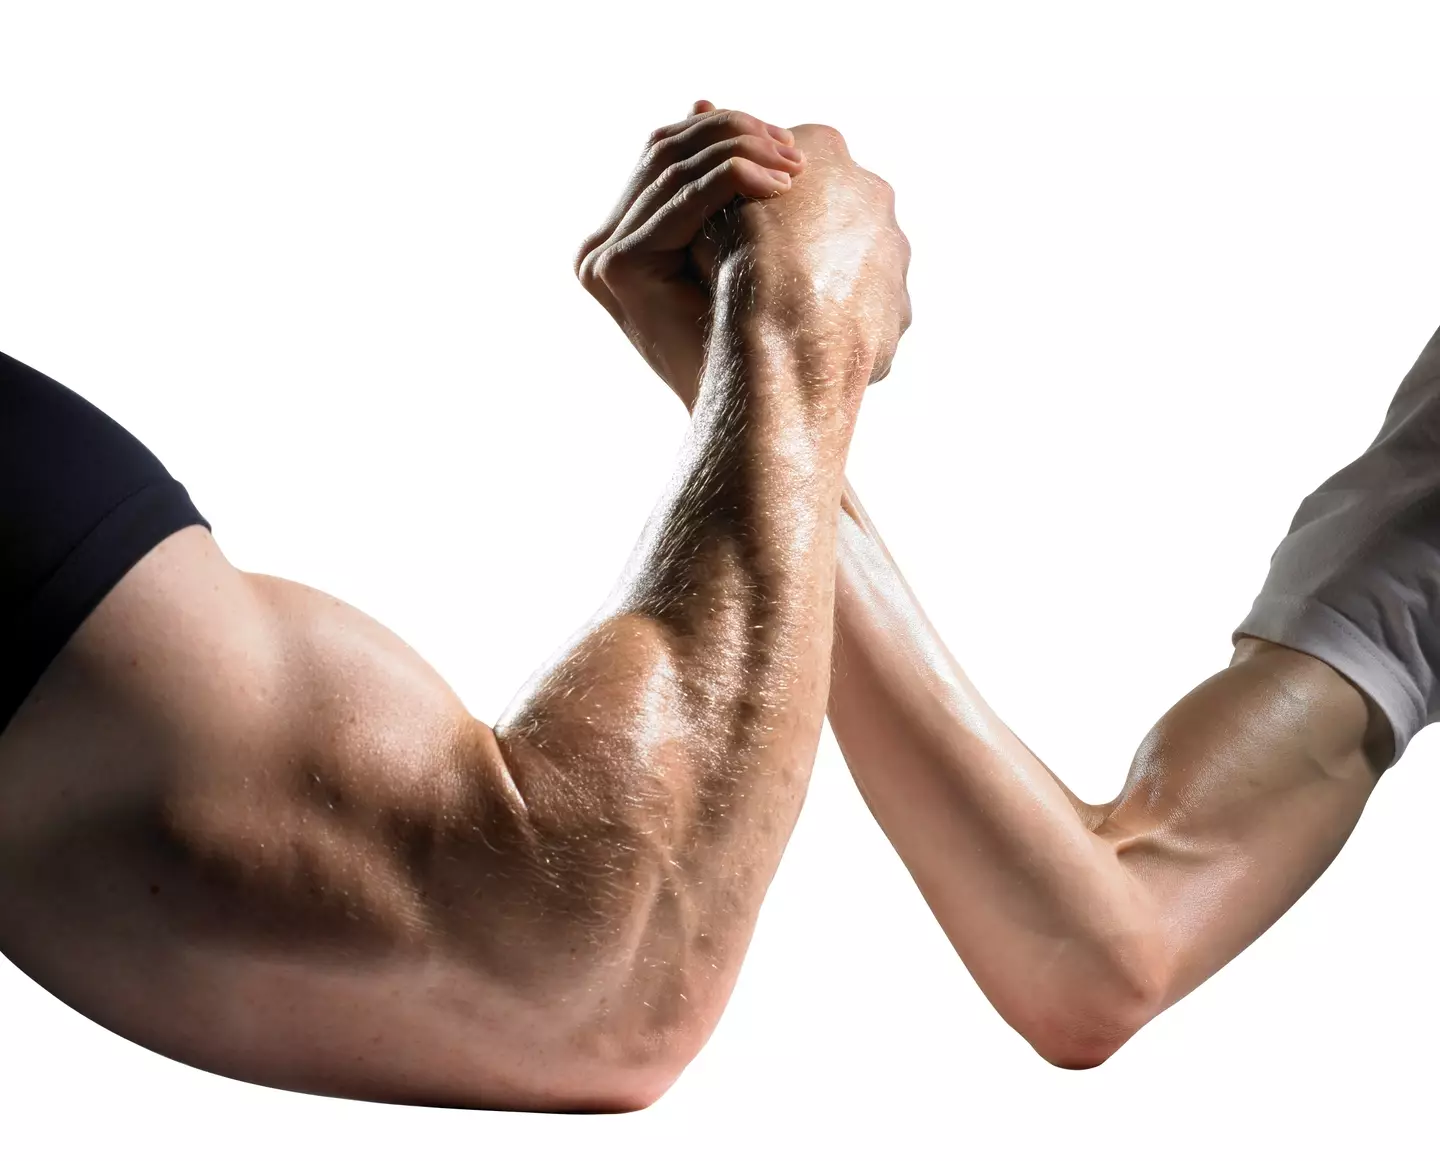 Strength isn't everything in arm wrestling, up to a point.